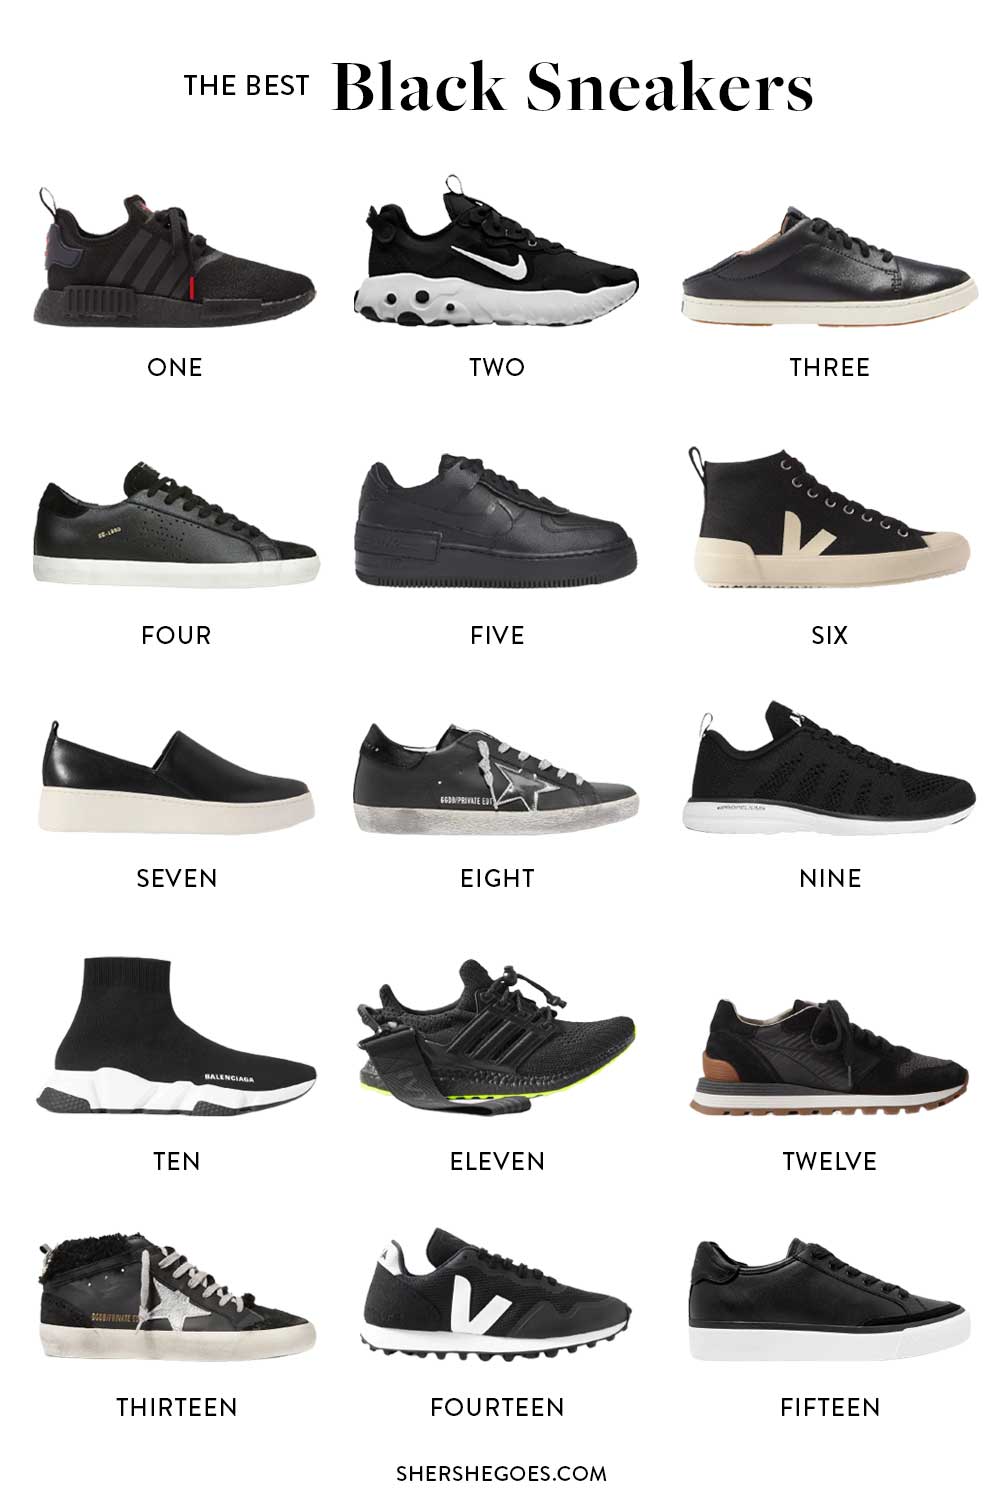 too much bit Production Back to Black: The 6 Best Black Sneakers for Women! (2021)